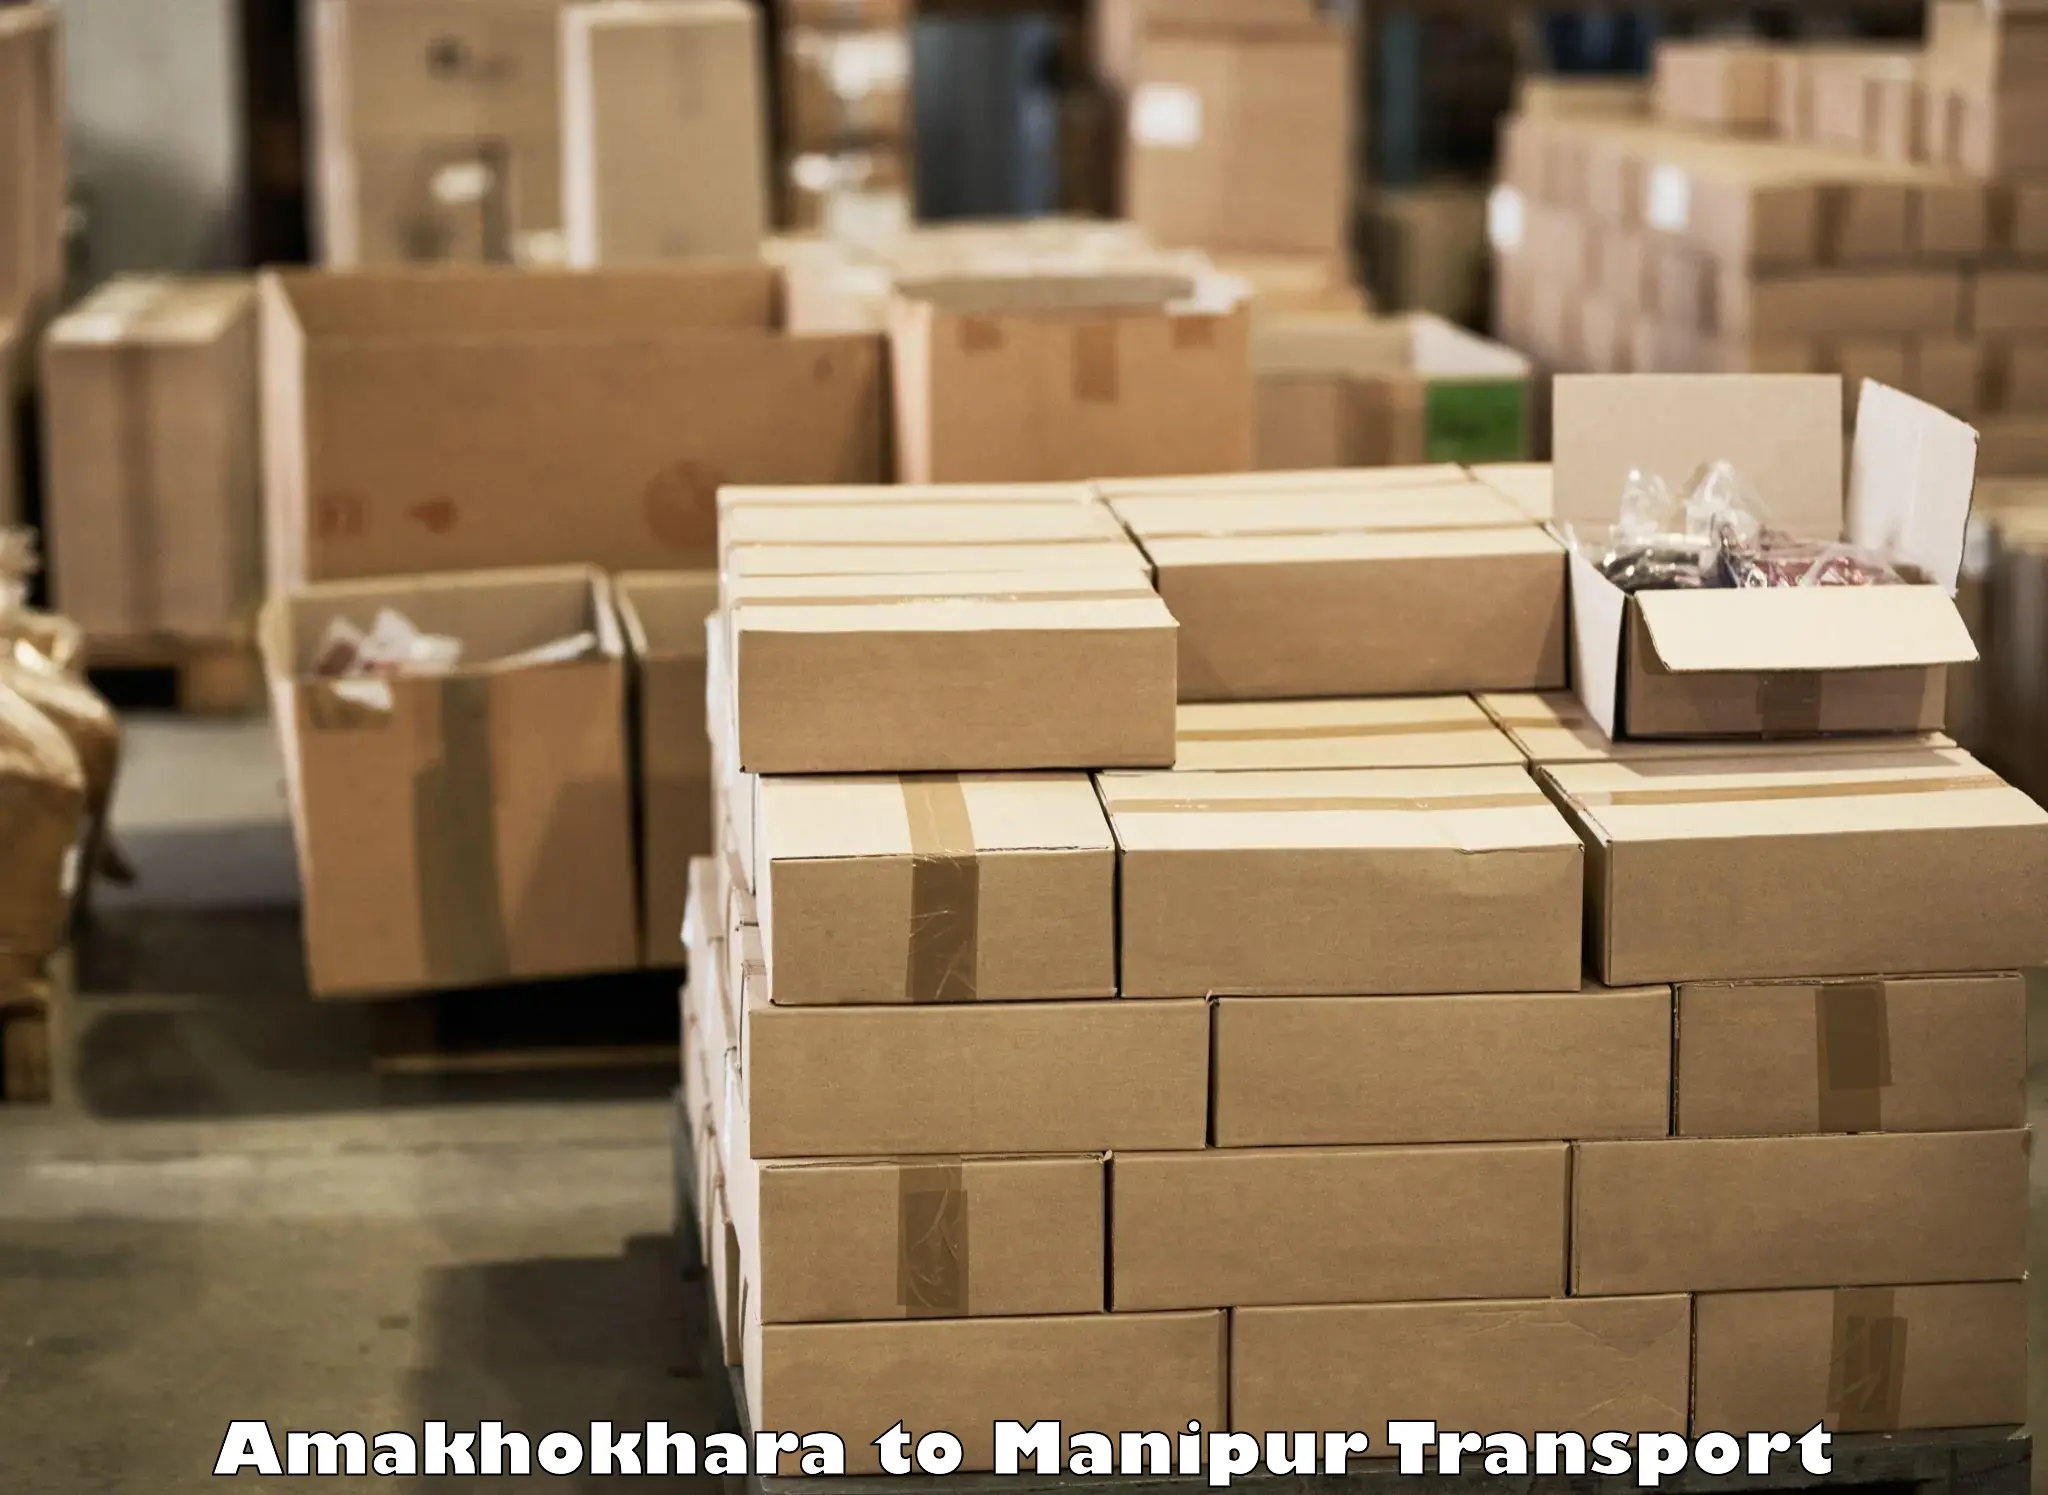 Truck transport companies in India in Amakhokhara to Imphal